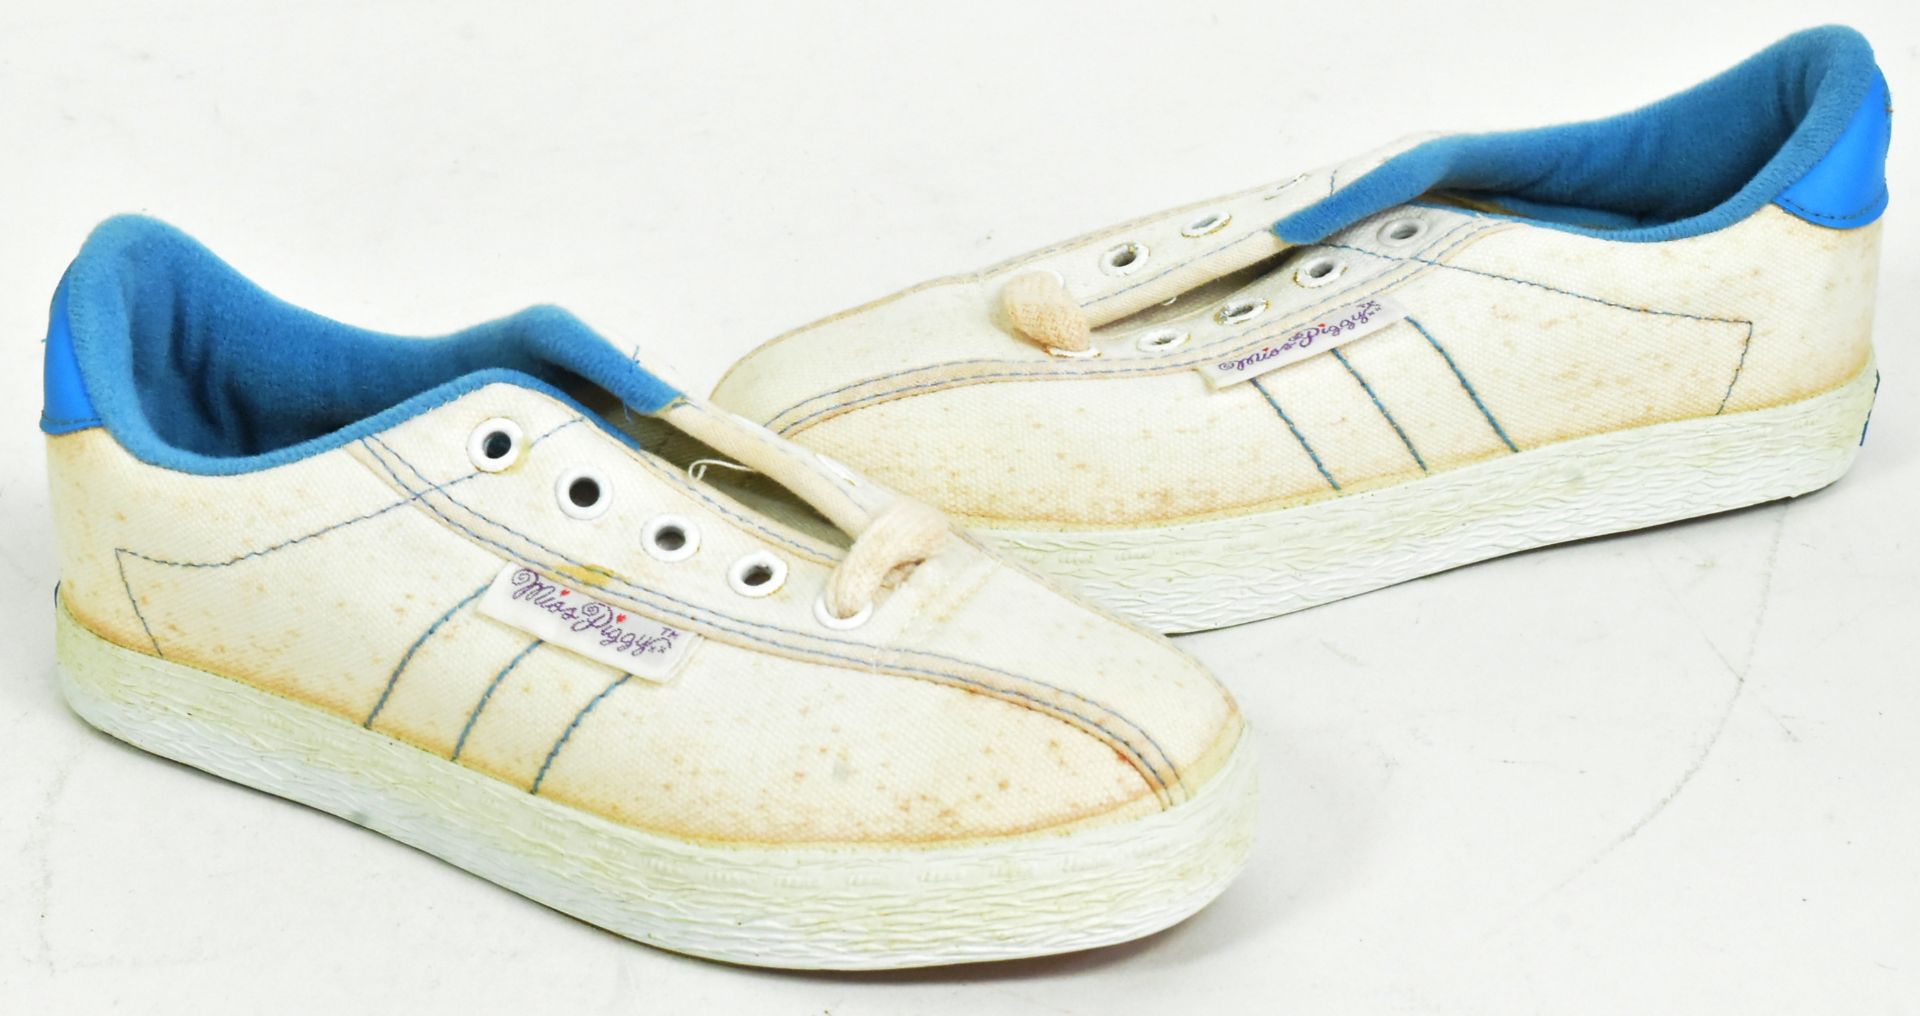 THE MUPPETS - VINTAGE KEDS SHOES - MISS PIGGY - Image 3 of 5